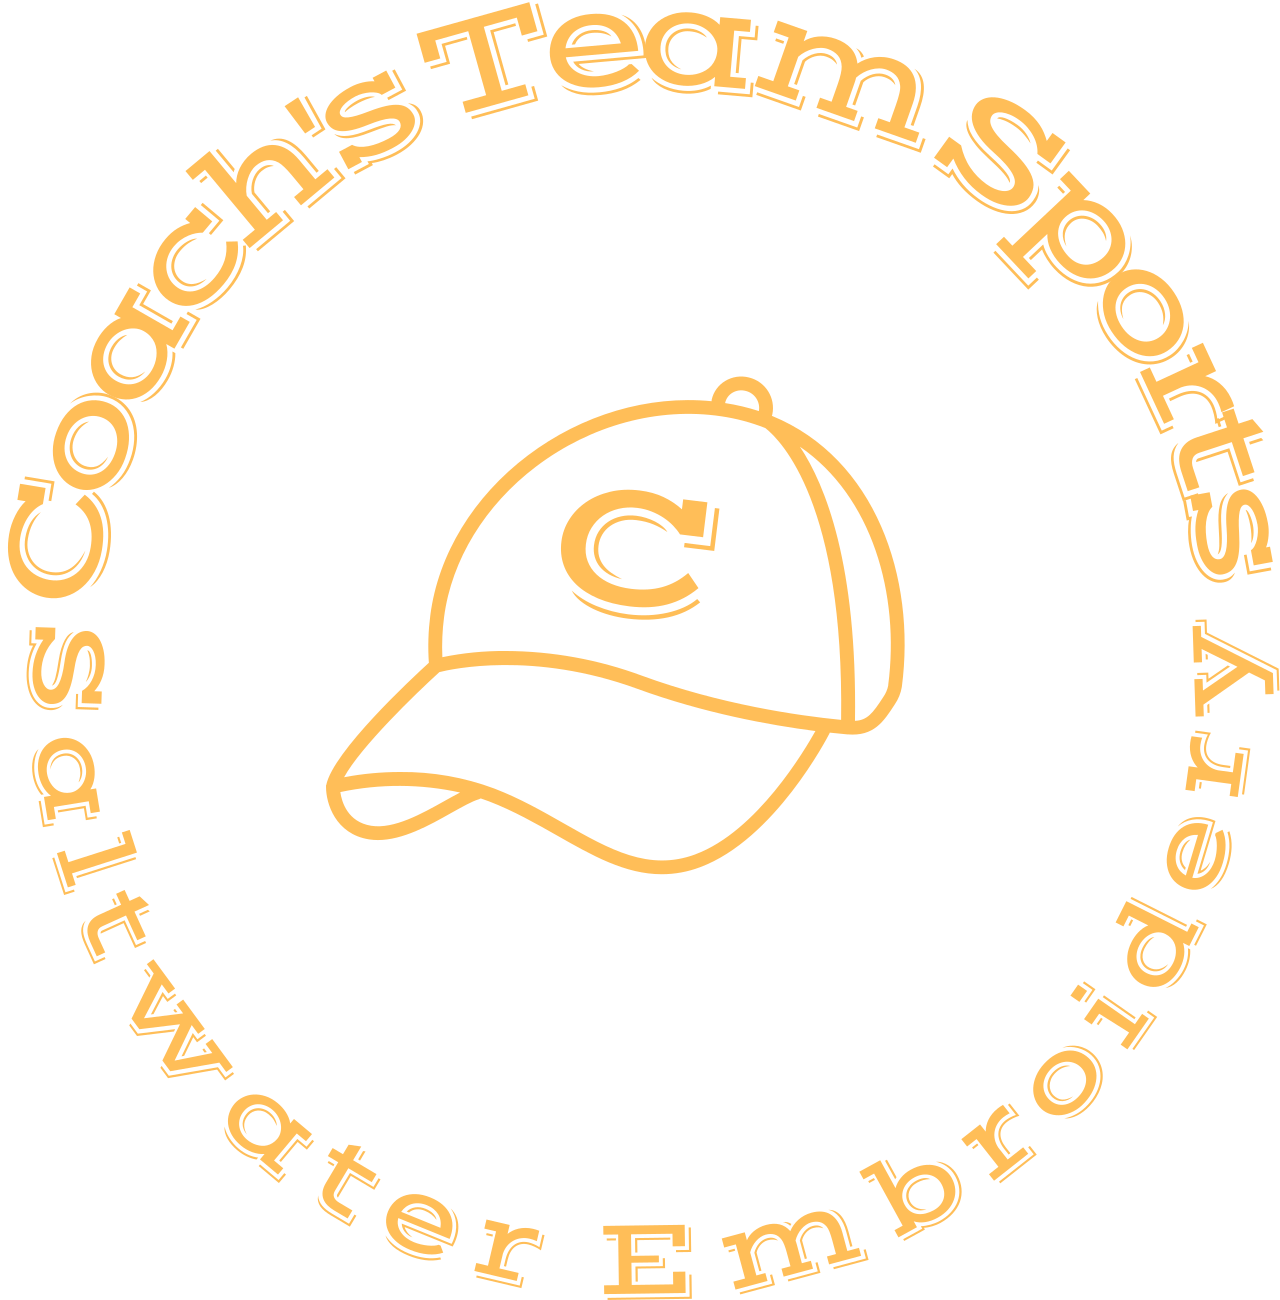 Coach's Team Sports 's web page